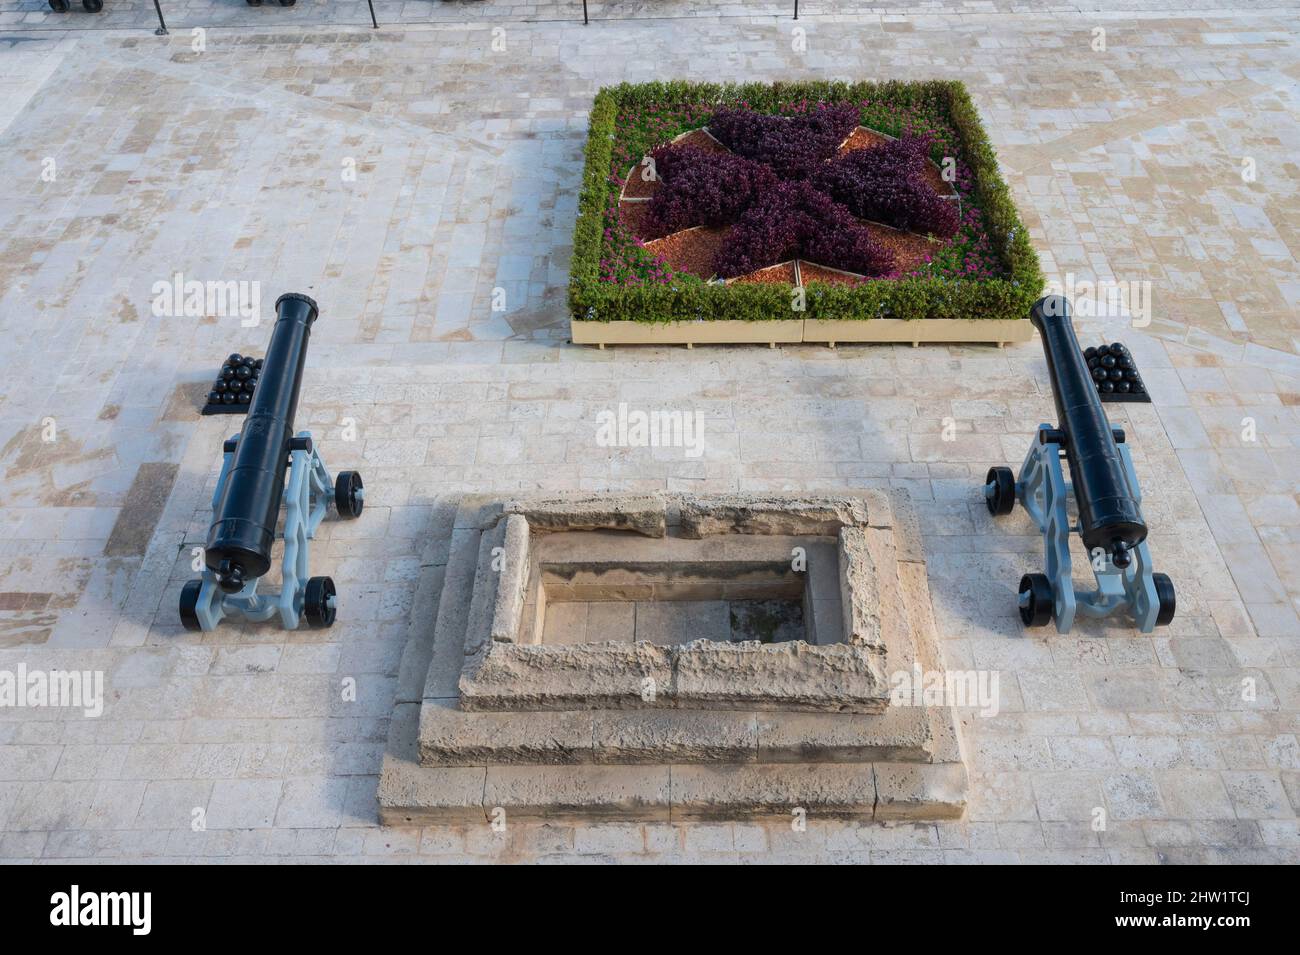 Malta, Valletta, city listed by UNESCO as Worlheritage, the Upper Barrakka Gardens, terrace of the public garden founded in the eighteenth century with the canons of the salutation battery Stock Photo